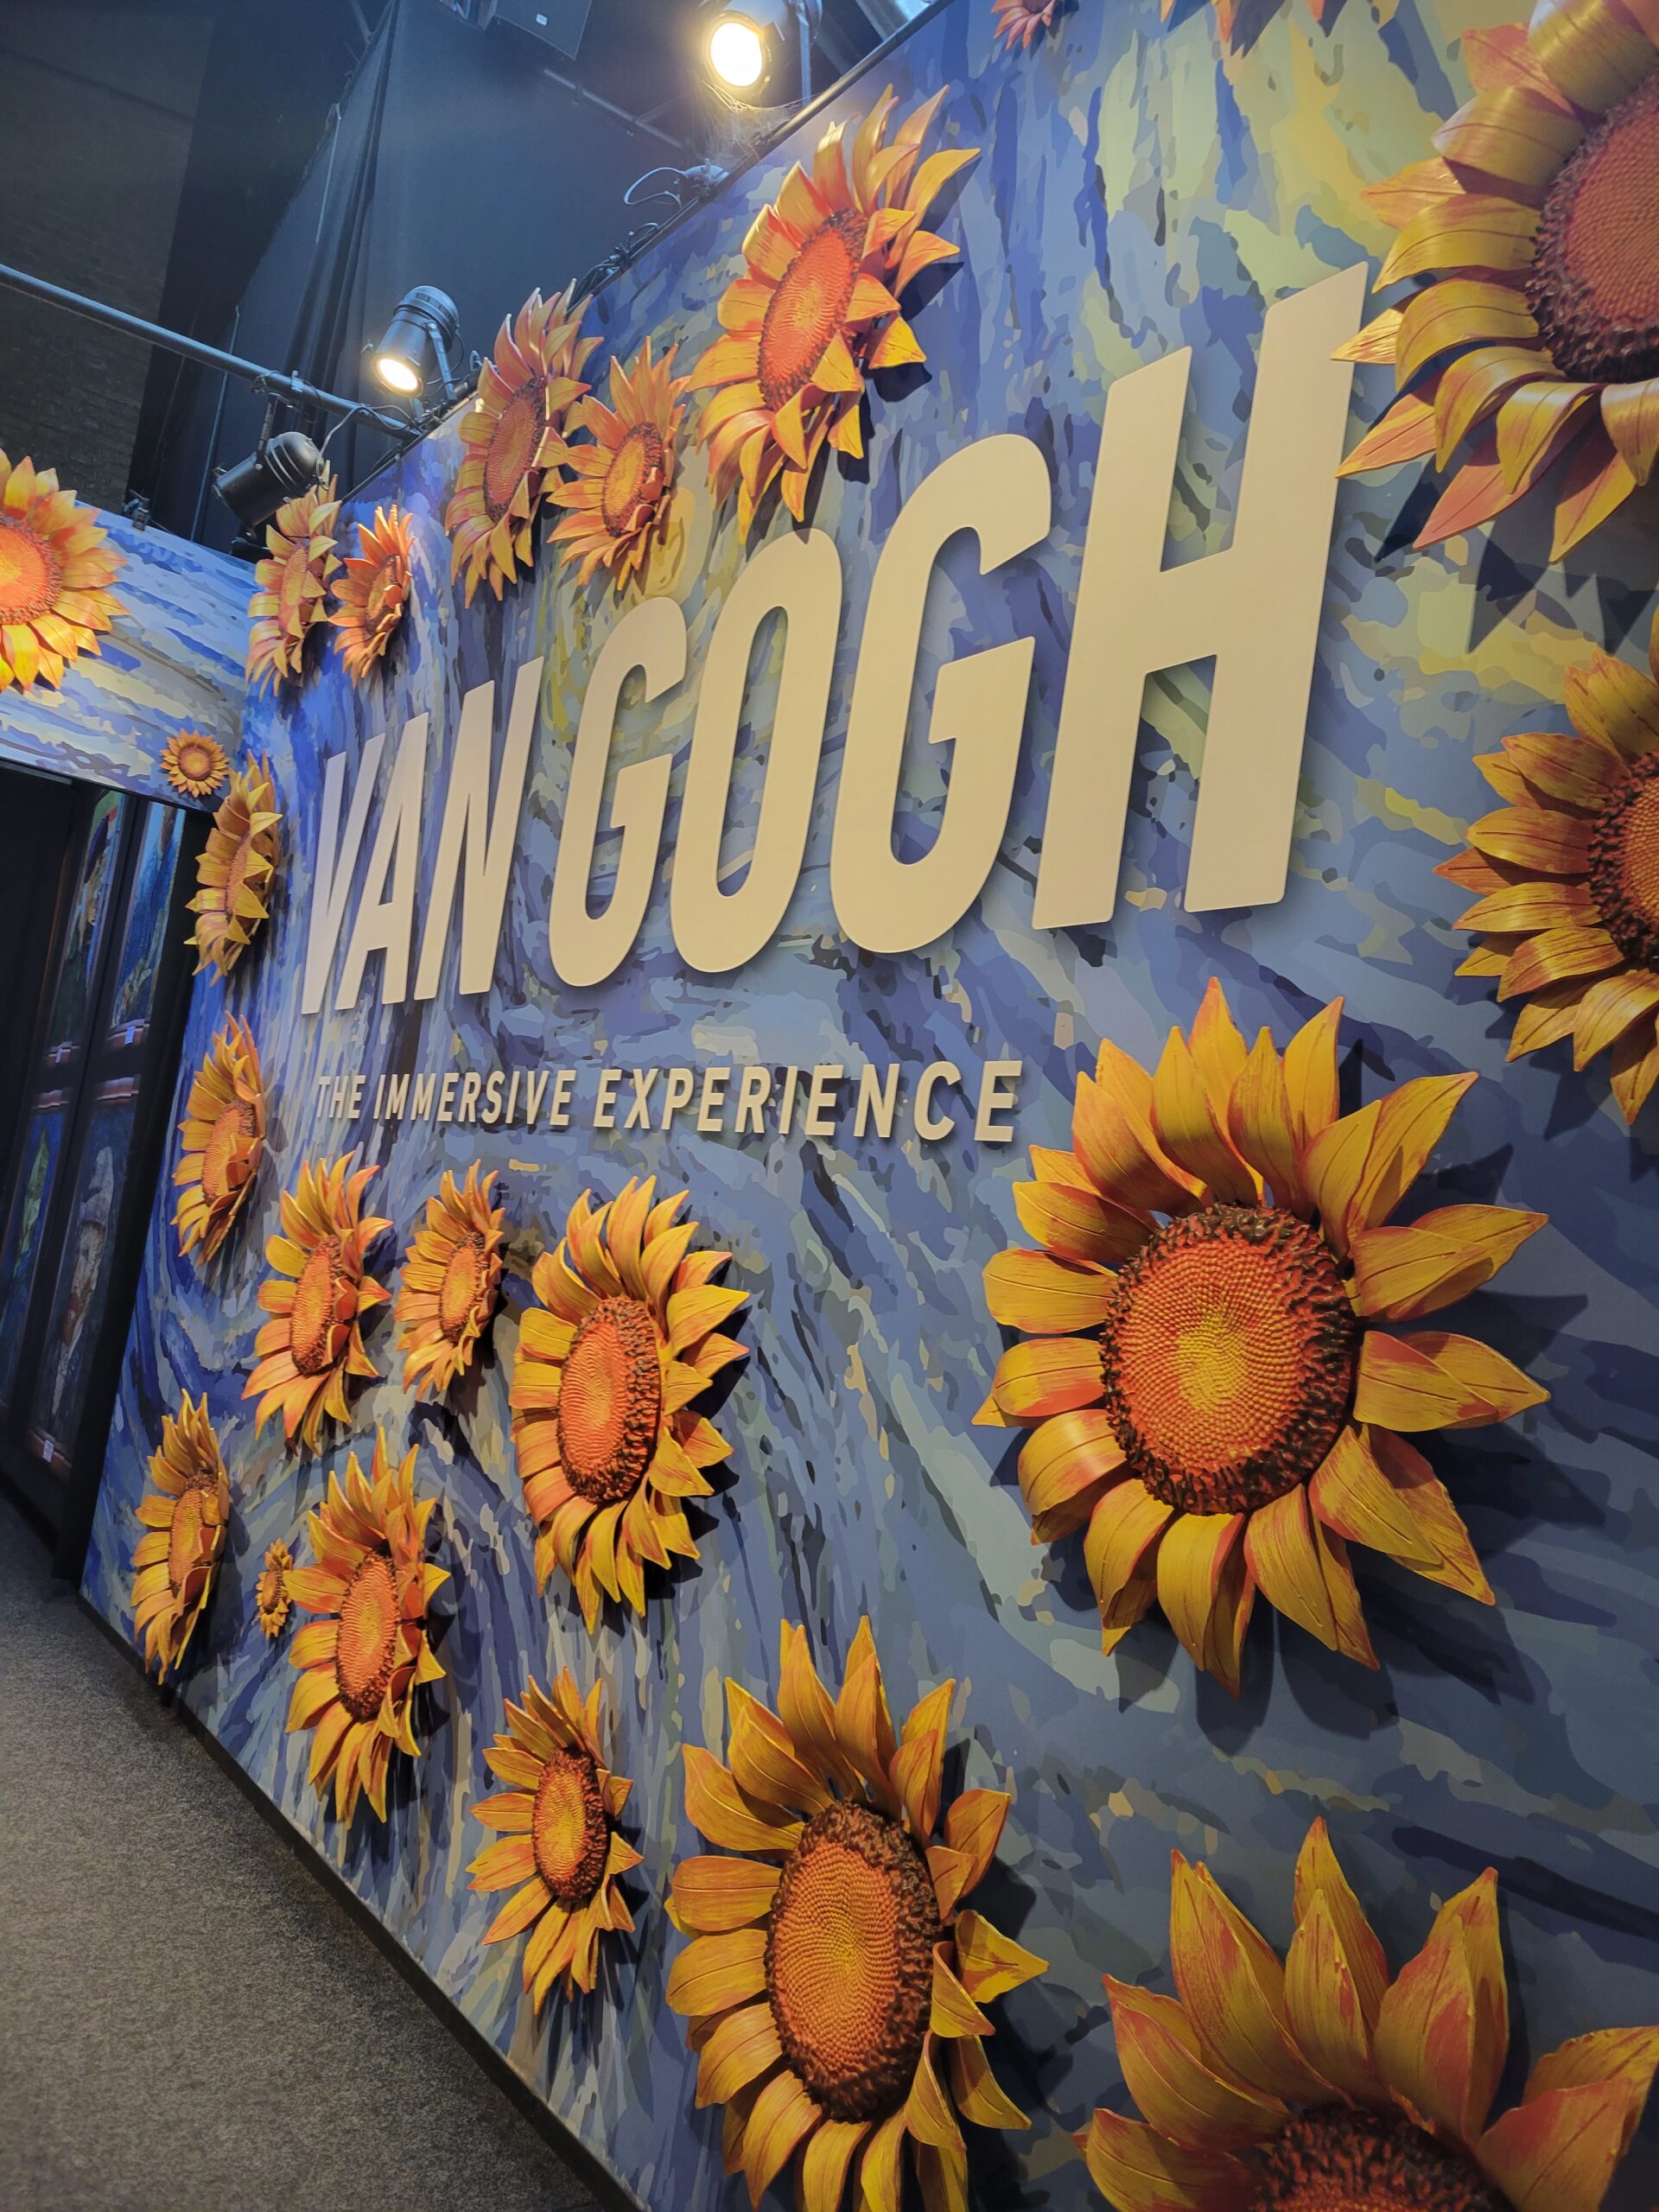 Local Restaurants and the Van Gogh Experience